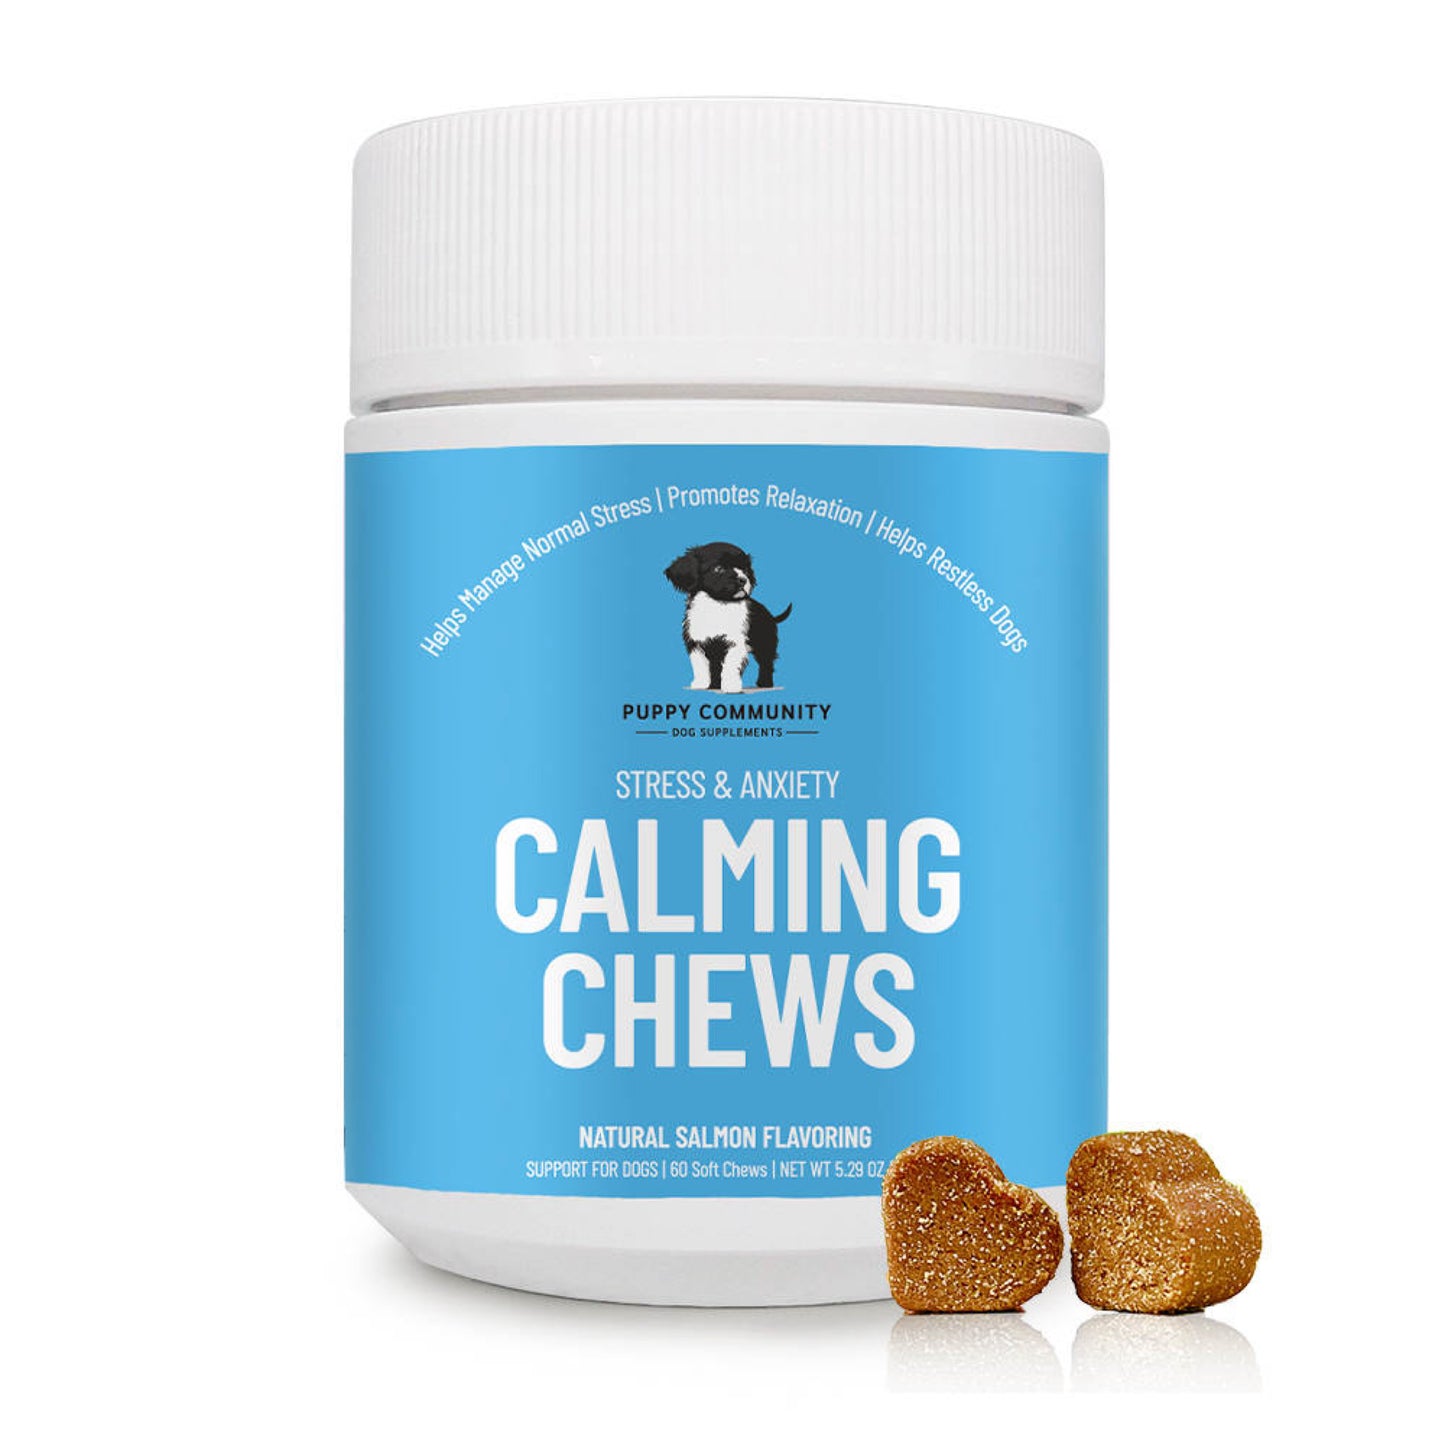 Calming Chews by Puppy Community